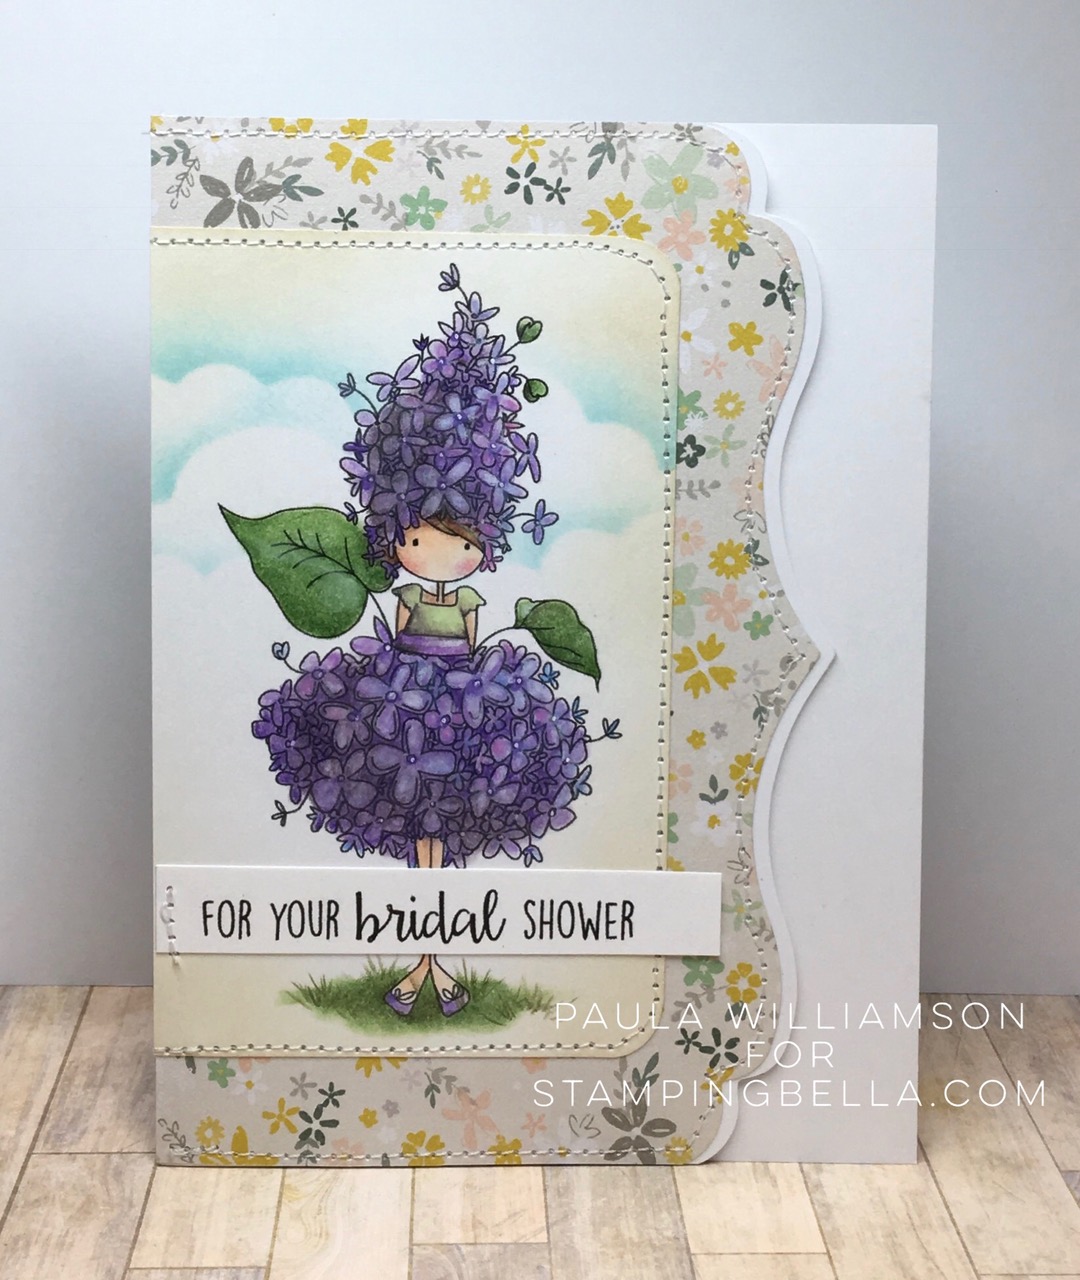 Bellarific Friday challenge with STAMPING BELLA- Card made by Paula Williamson  using our TINY TOWNIE GARDEN GIRL LILAC rubber stamp